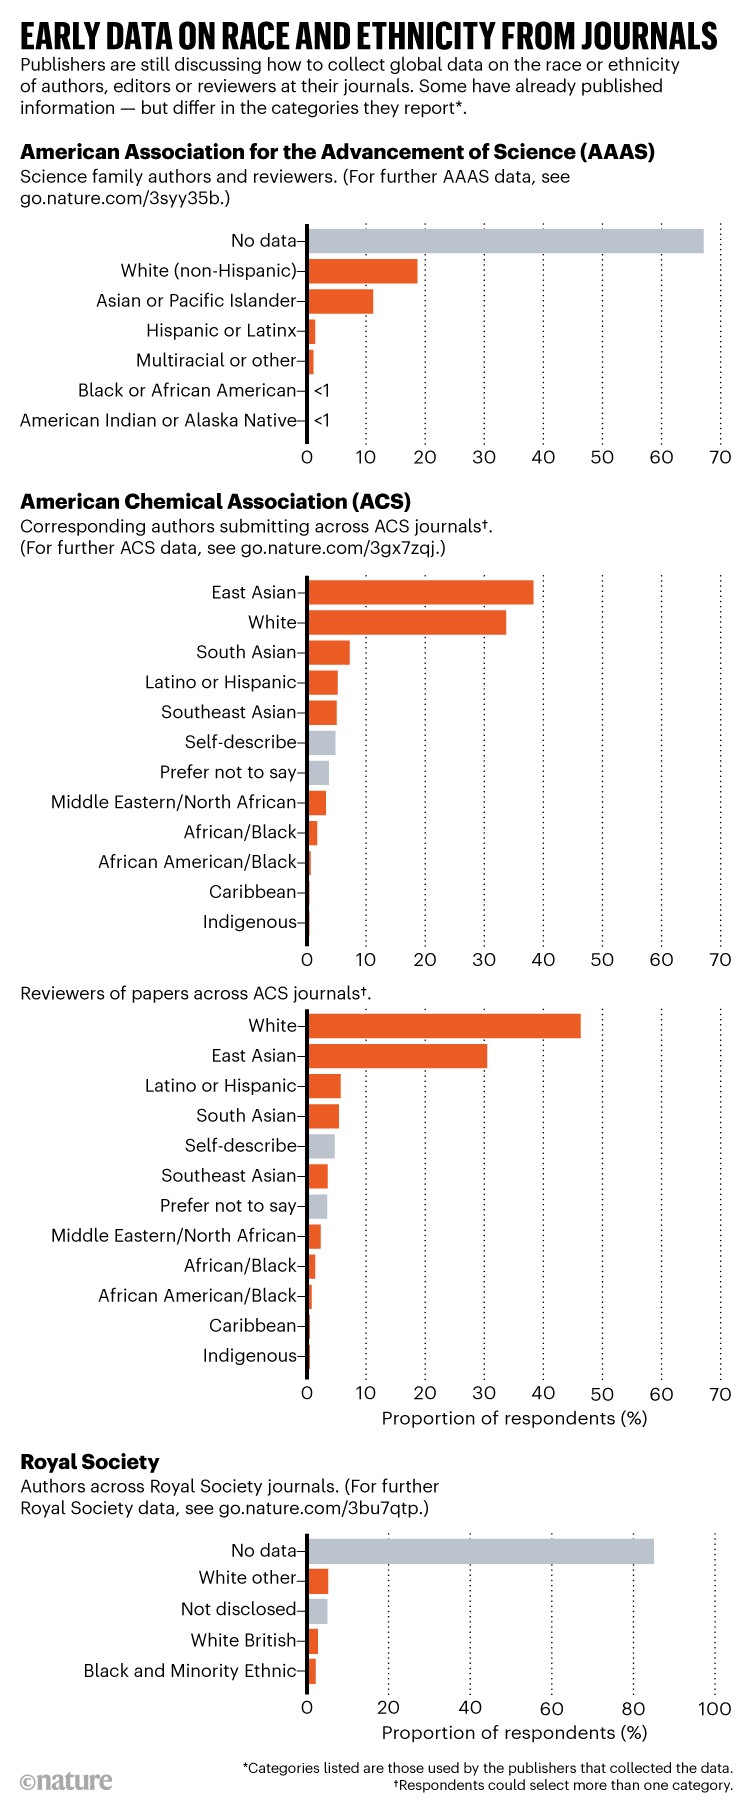 Early data on race and ethnicity from journals: Available data for authors, editors or reviewers from various publishers.